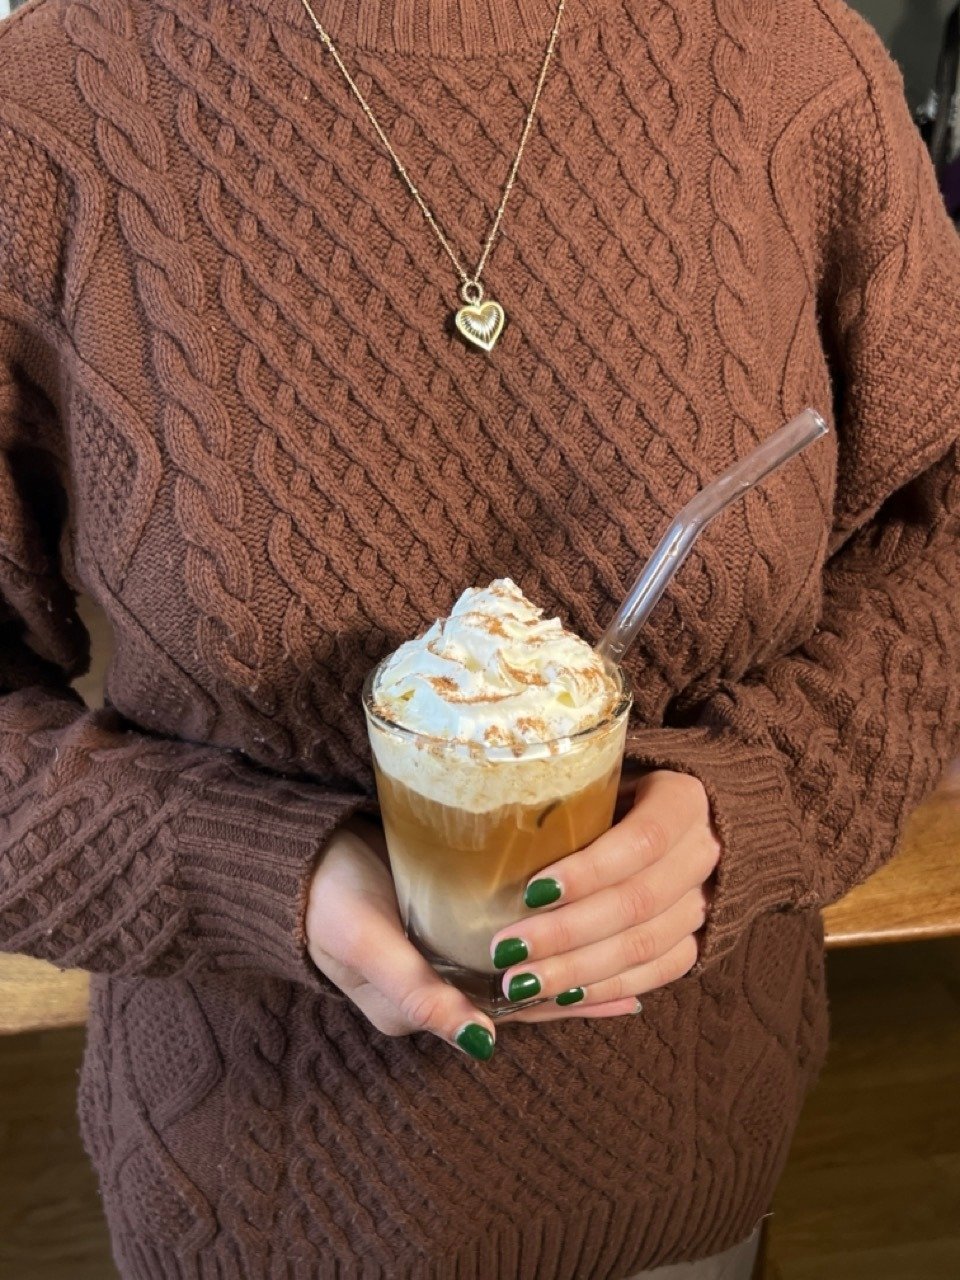 Woman holding completed Pumpkin Spice Latte in her hands